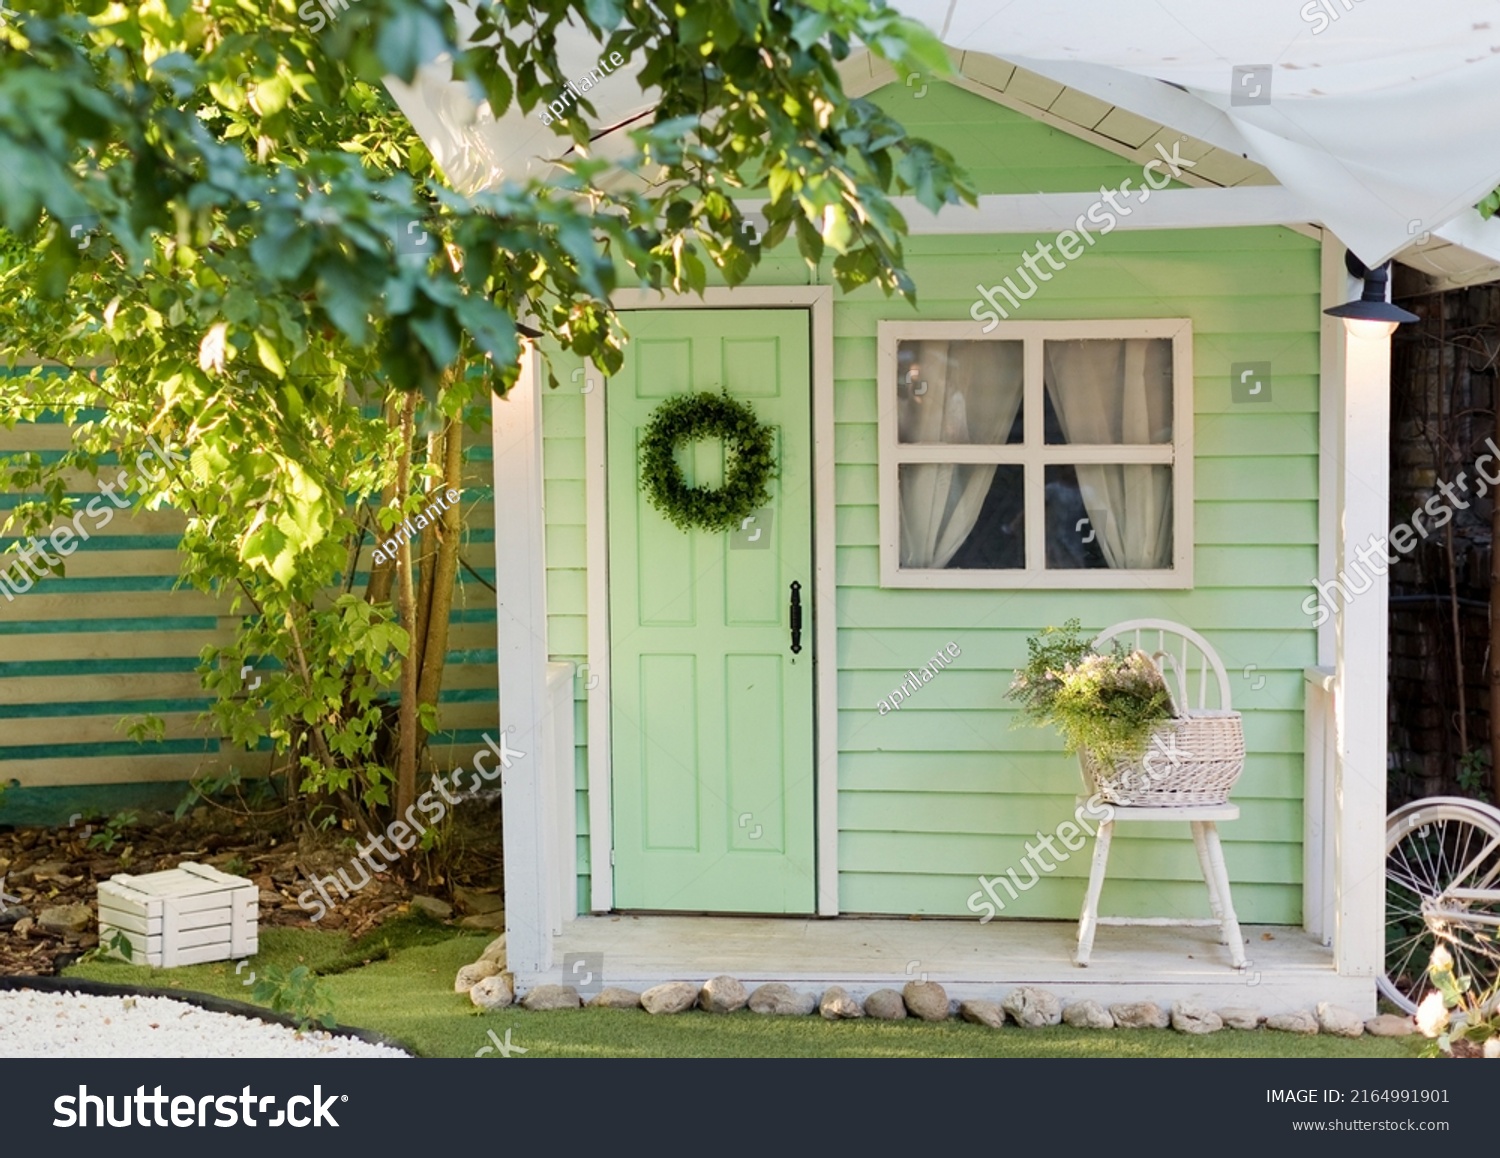 Small green shed garden house with window, door and chair outside. Kids playhouse, garden summerhouse background #2164991901